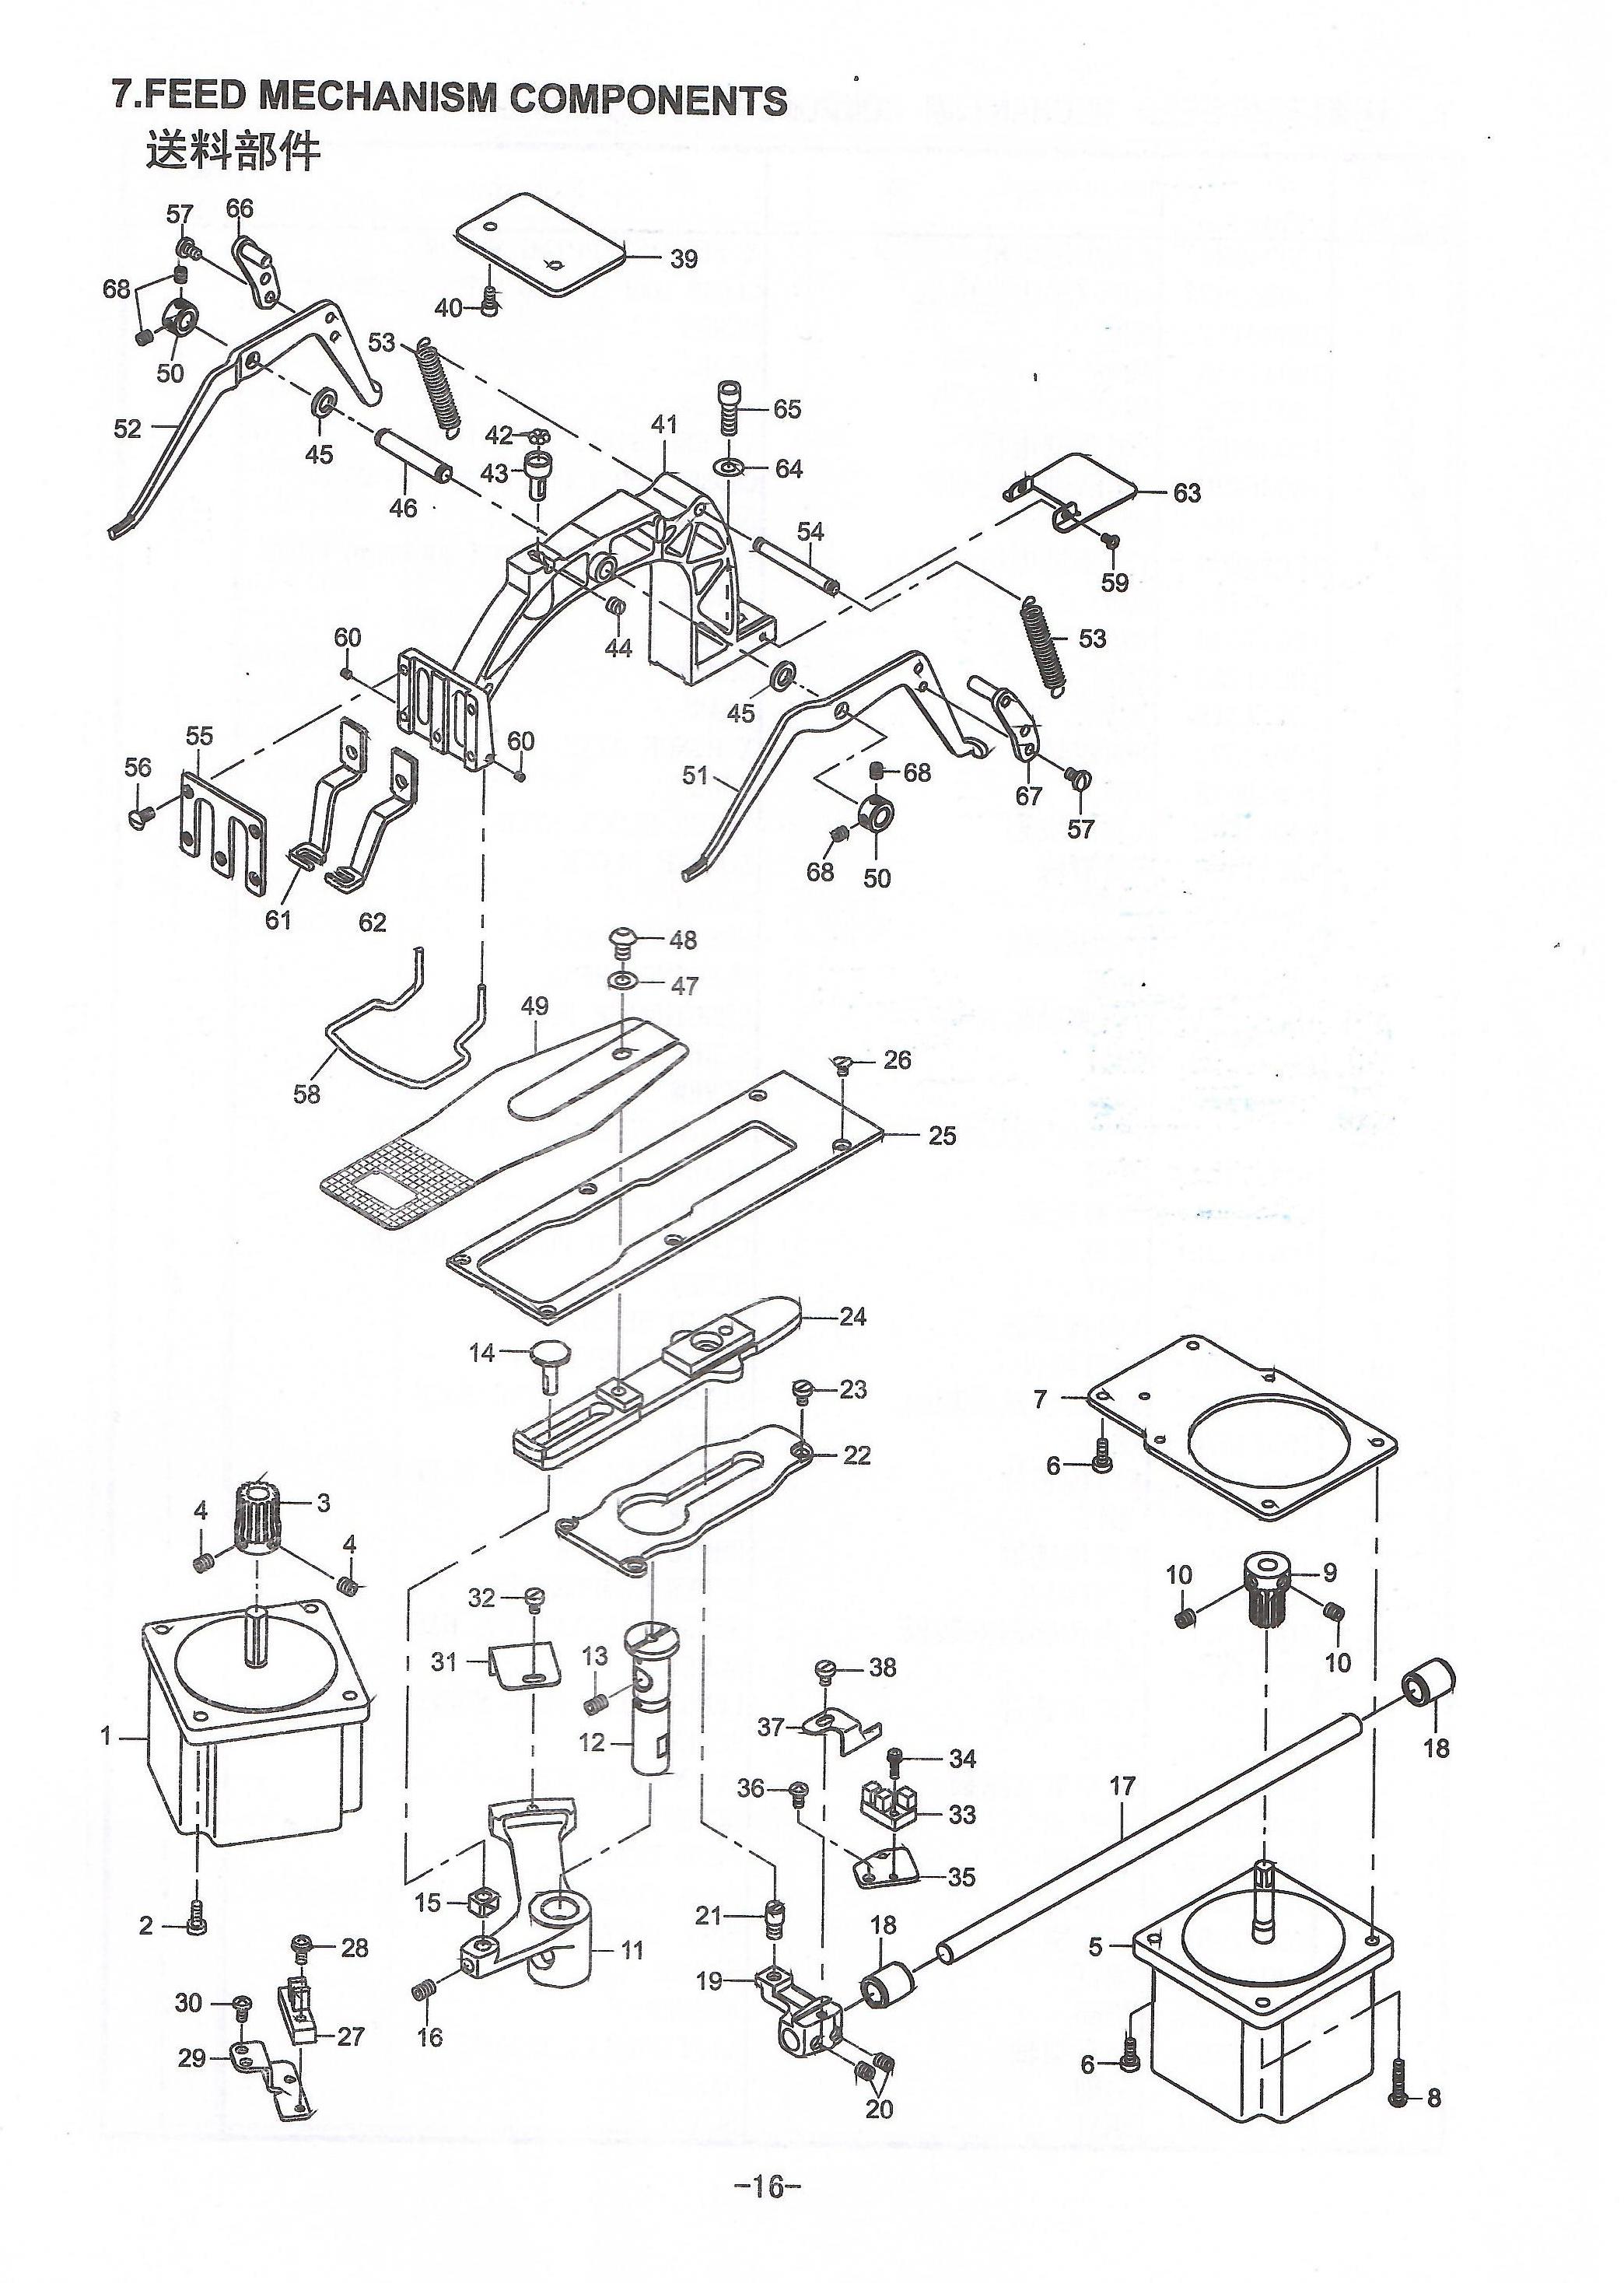 7 FEED MECHANISM COMPONENTS